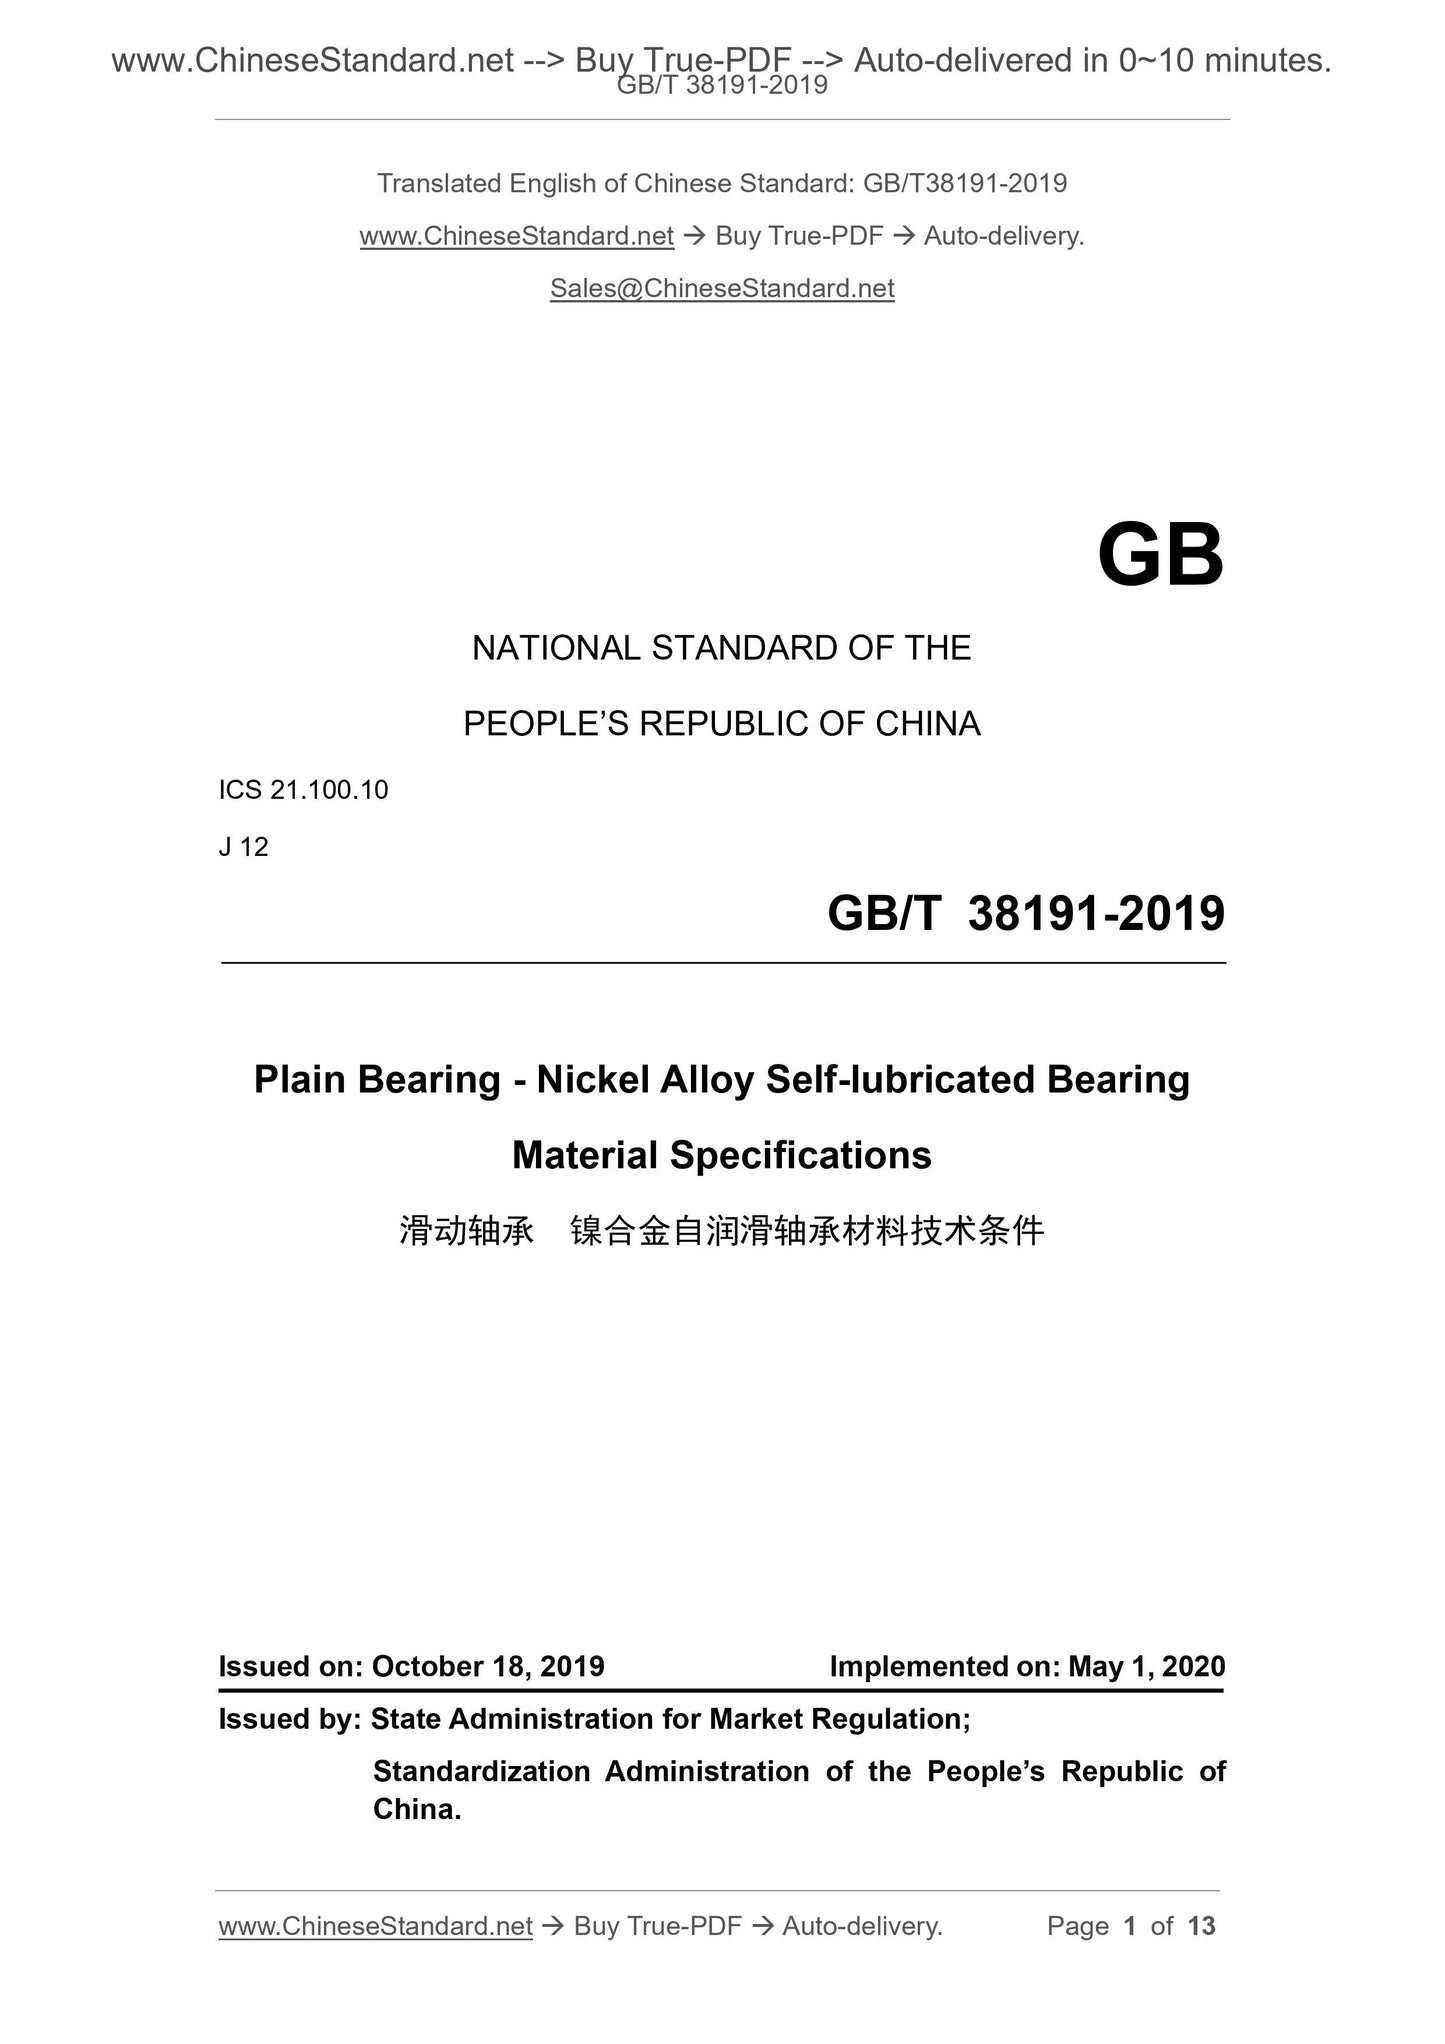 GB/T 38191-2019 Page 1